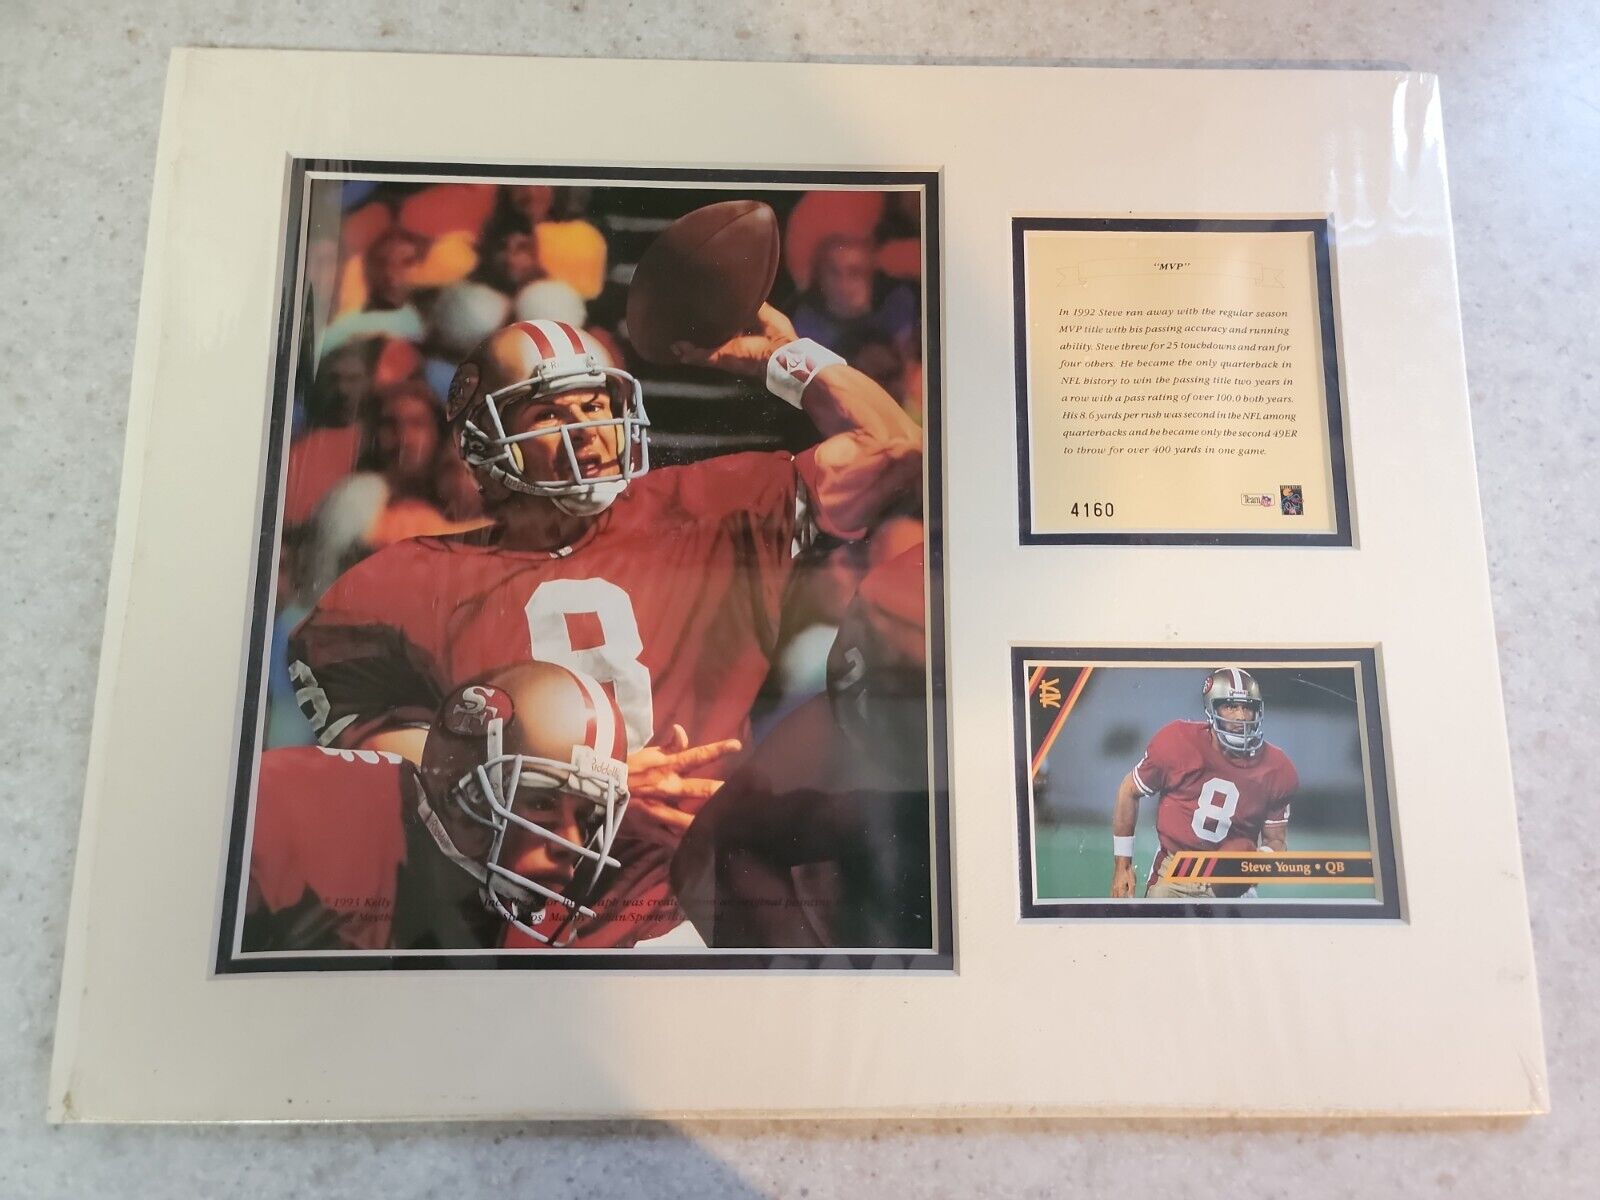 1993 Steve Young San Francisco 49ers Kelly Russell Limited Edition Lithograph